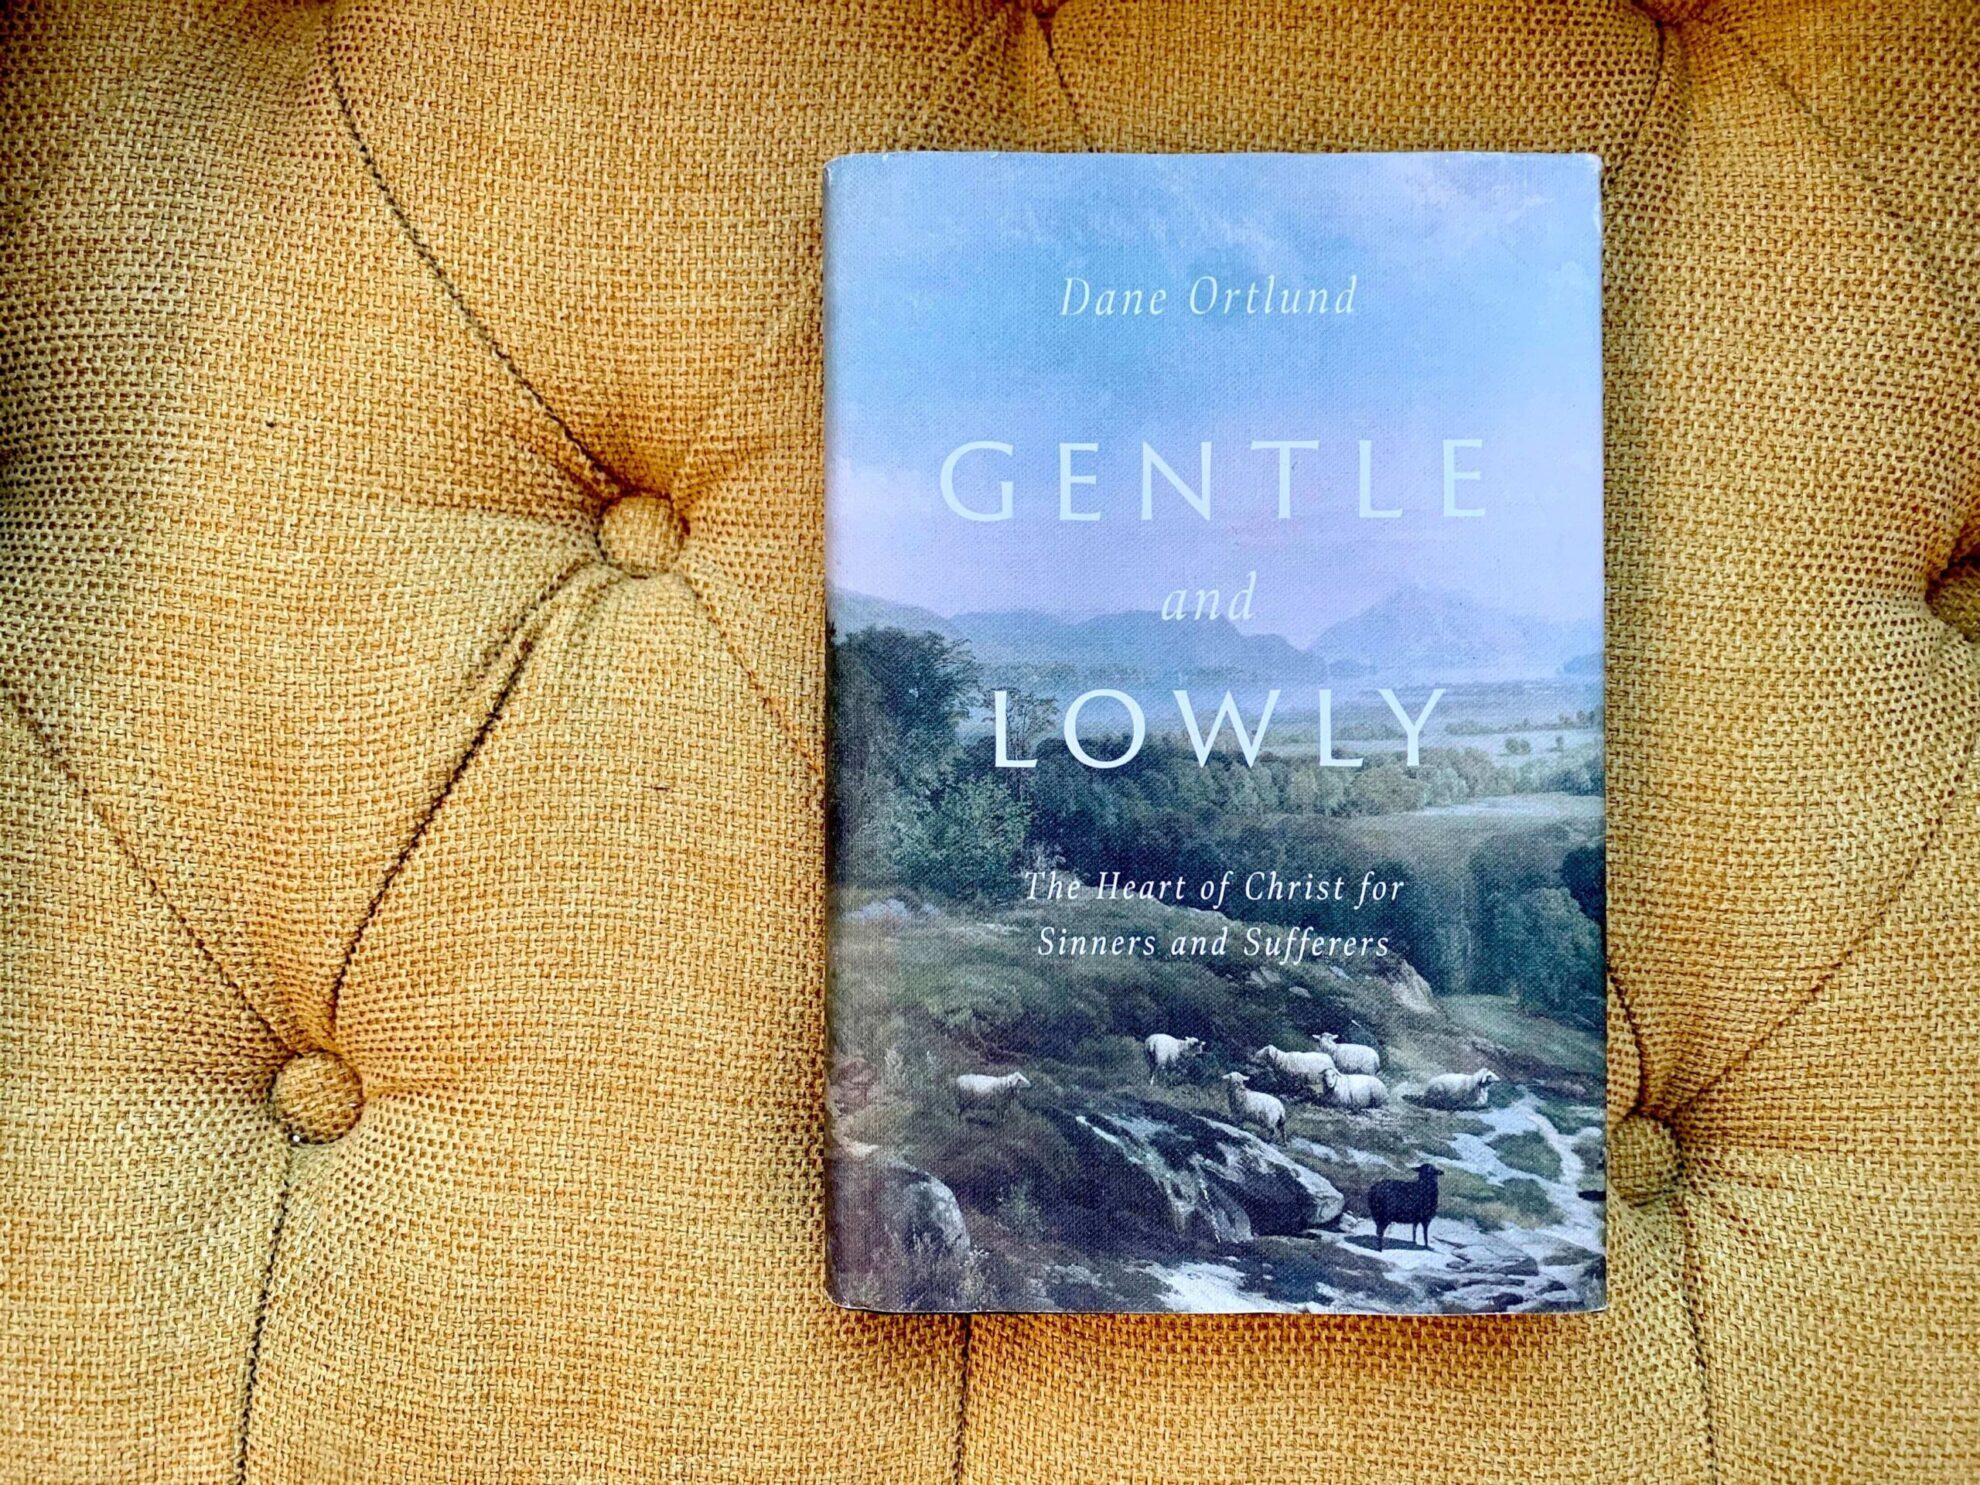 book review gentle and lowly